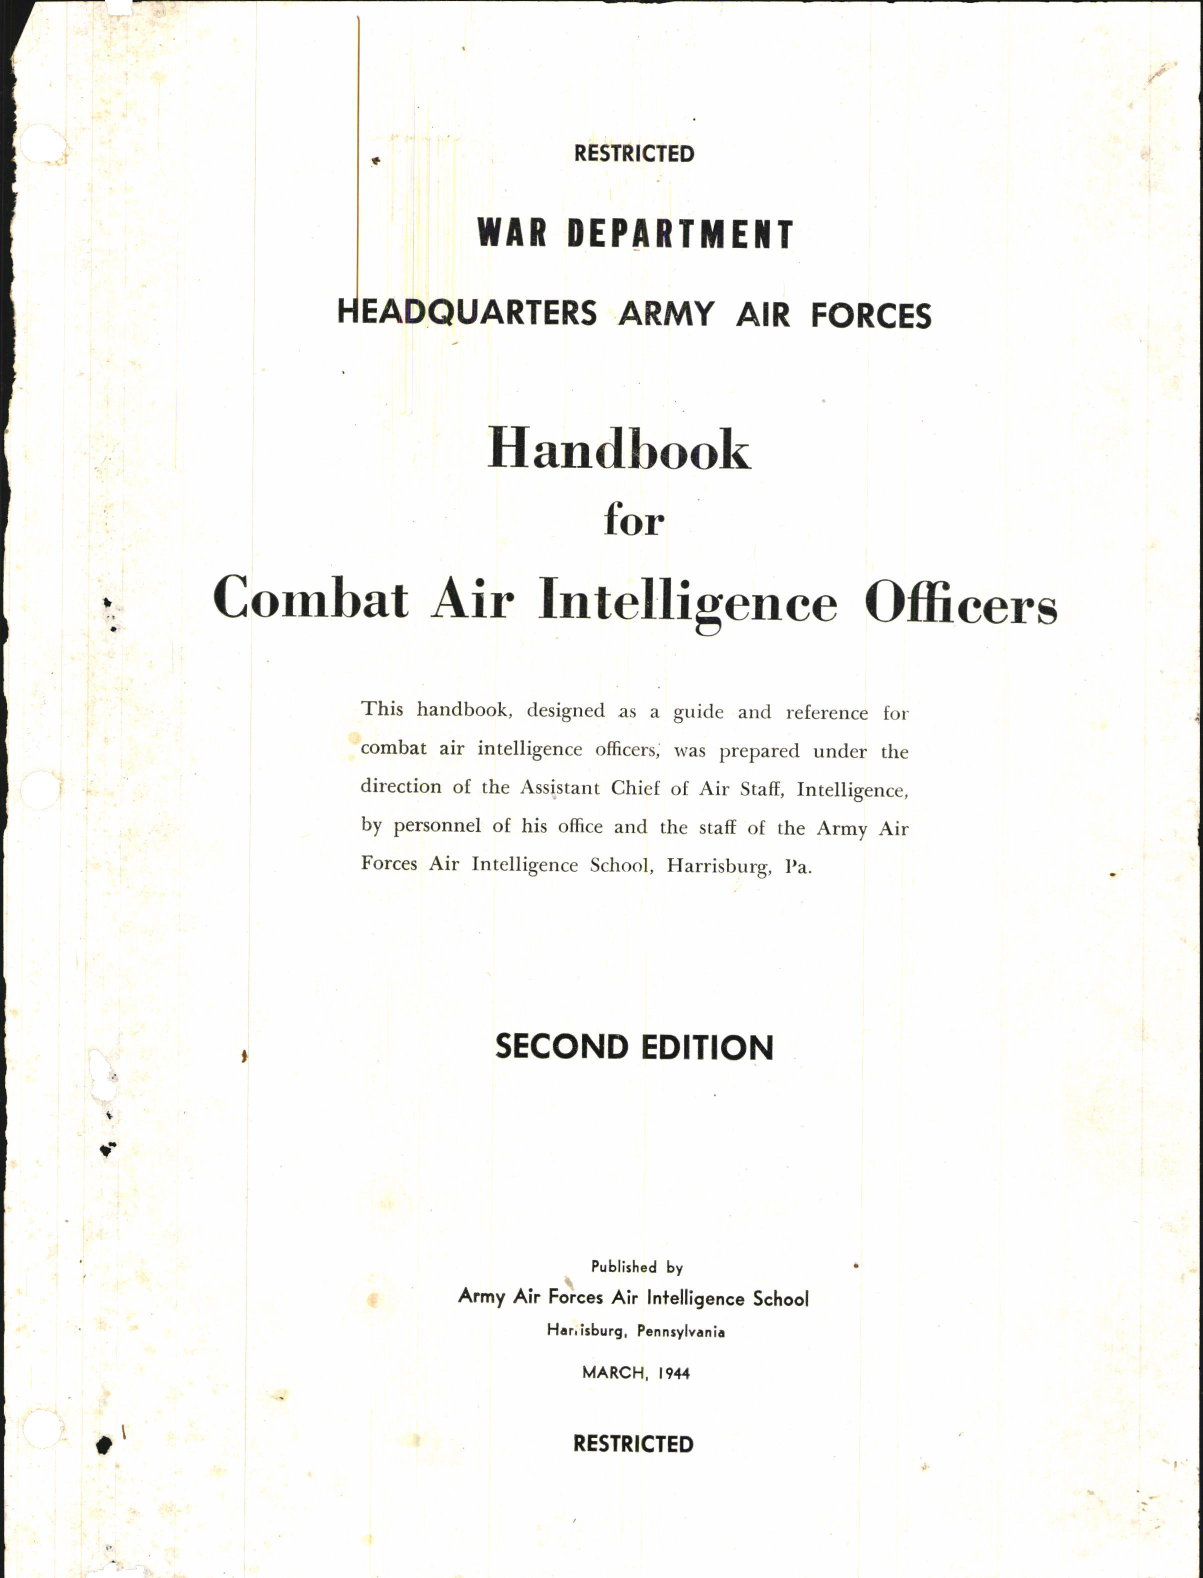 Sample page 3 from AirCorps Library document: Handbook for Combat Air Intelligence Officers